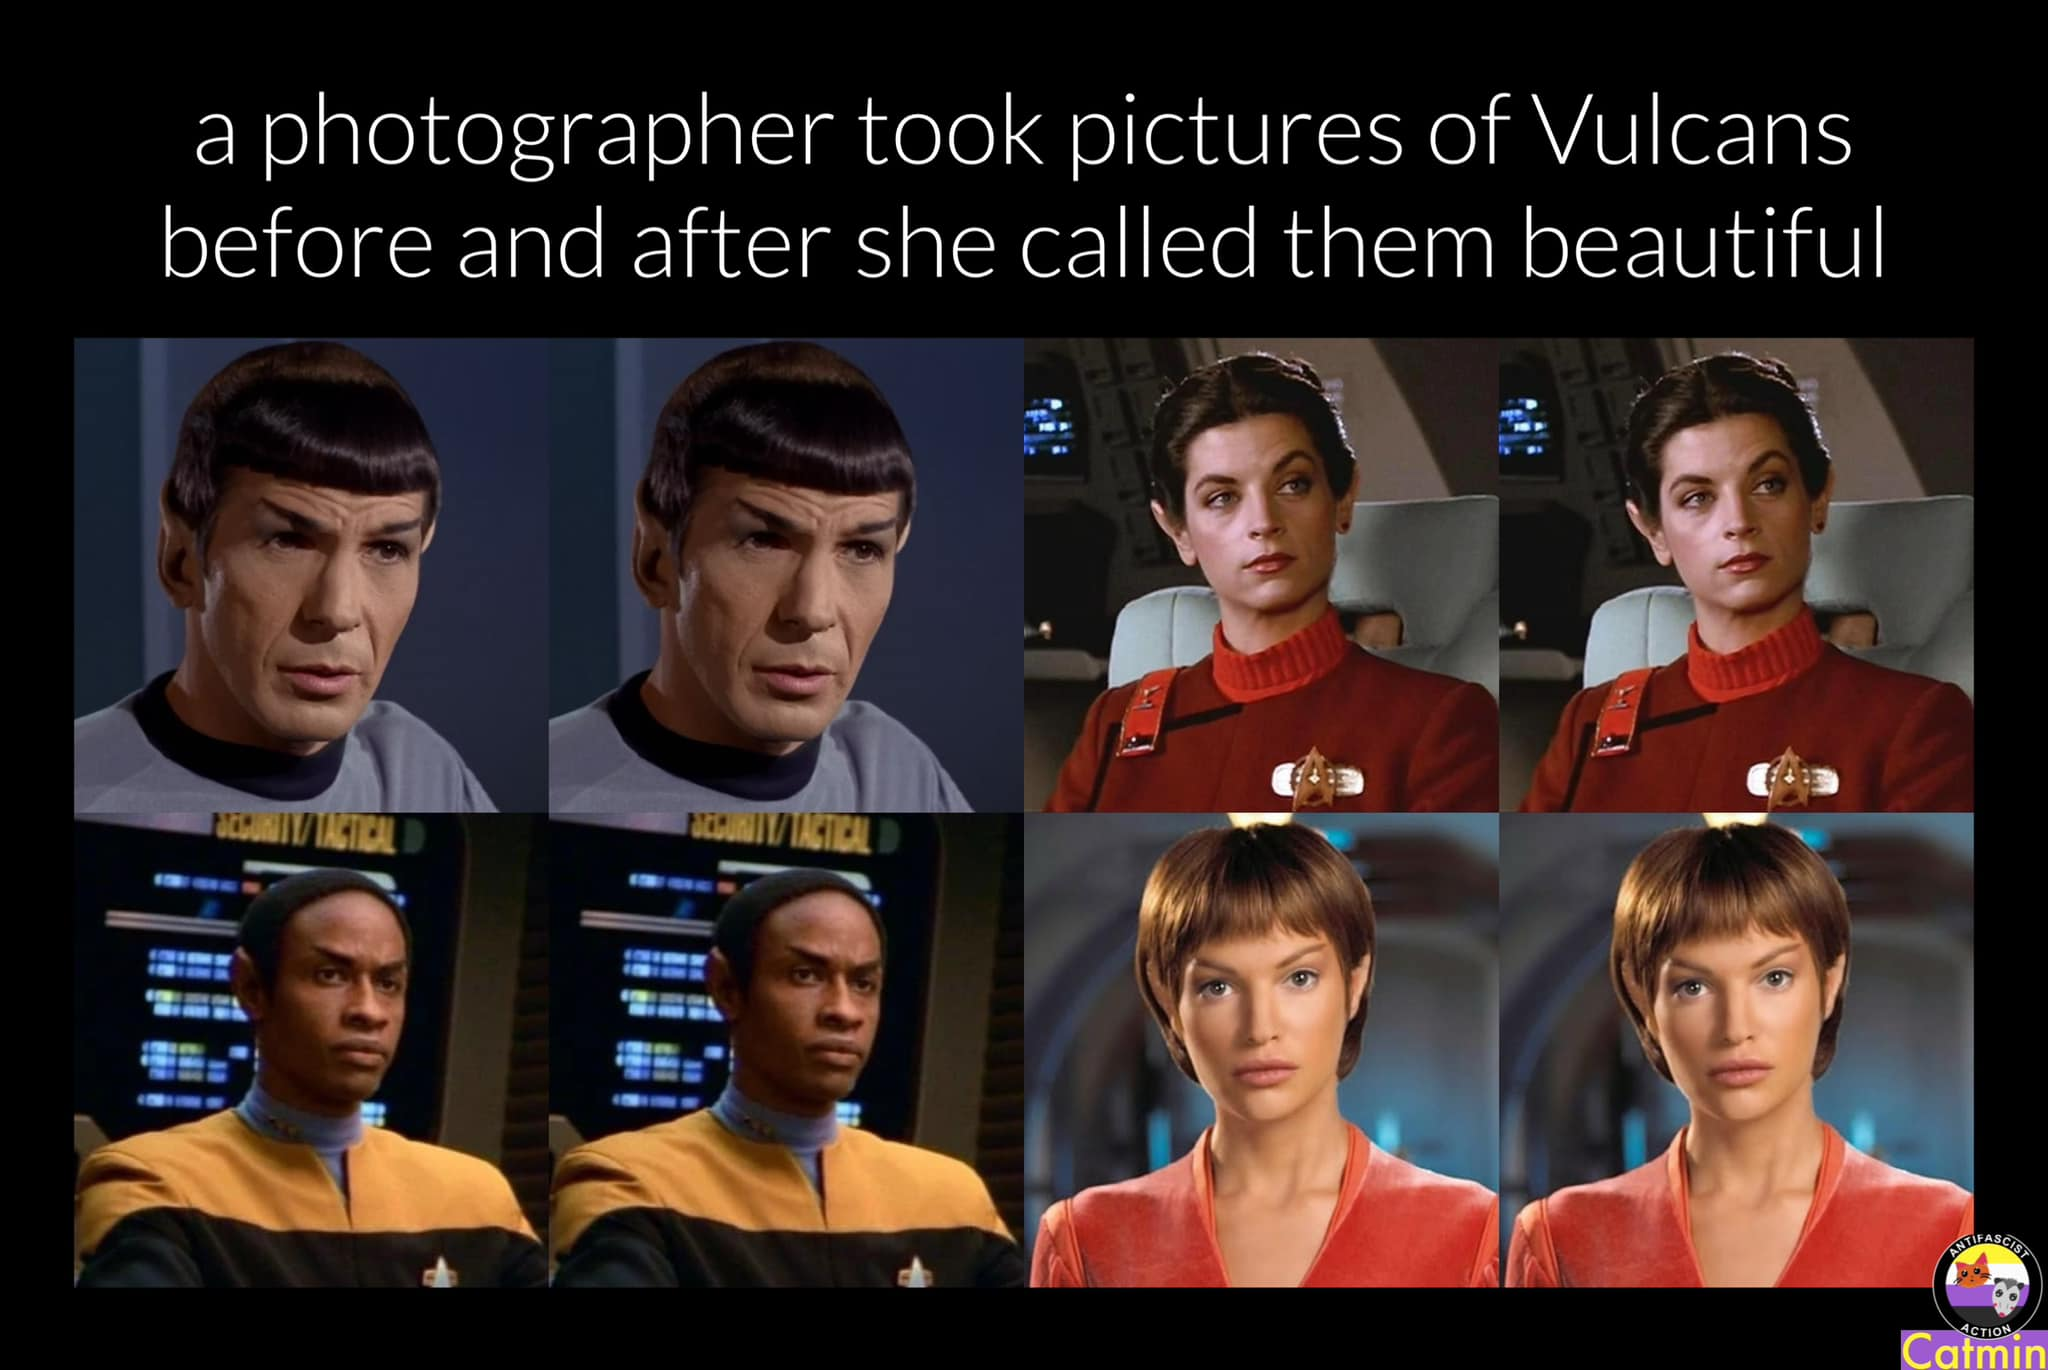 A photographer took pictures of Vulcans before and after she called them beautiful